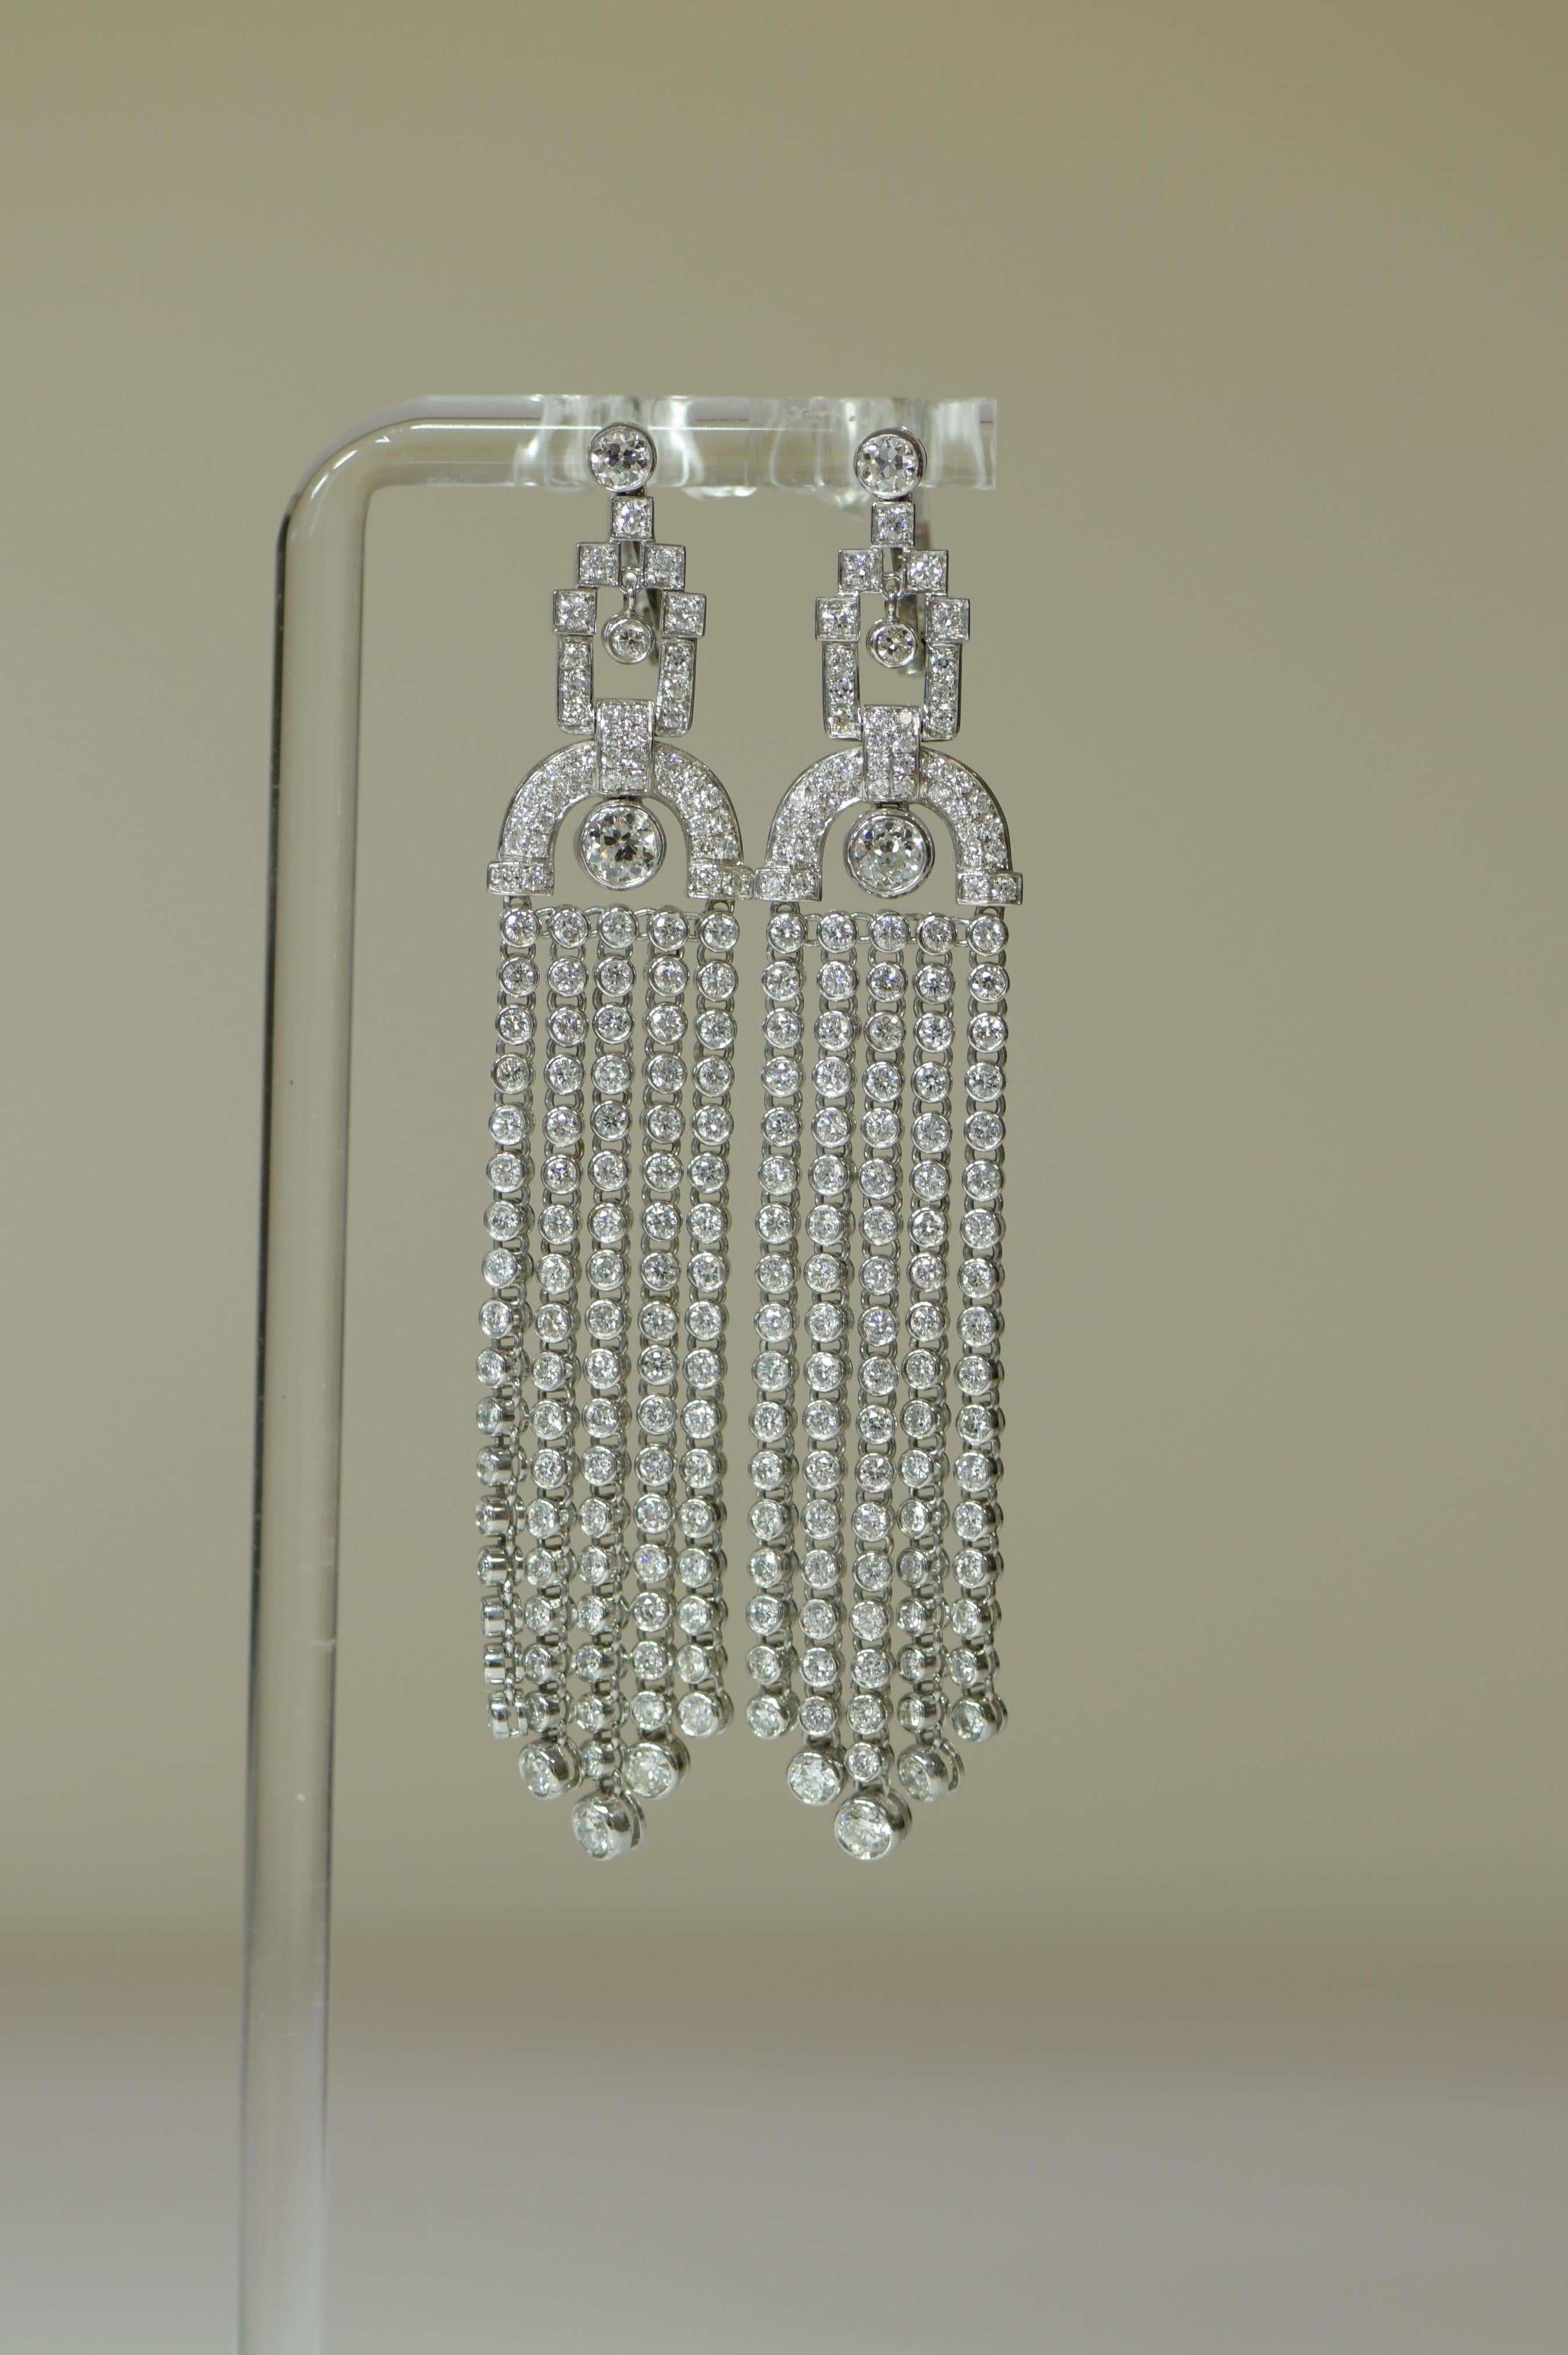 A wonderfully elegant pair of long earrings. Hanging below the top part are four tassels with such flexibility. They hang straight when not moving but as soon as there is a touch or any movement they shimmer and catch the light. 

The craftsmanship